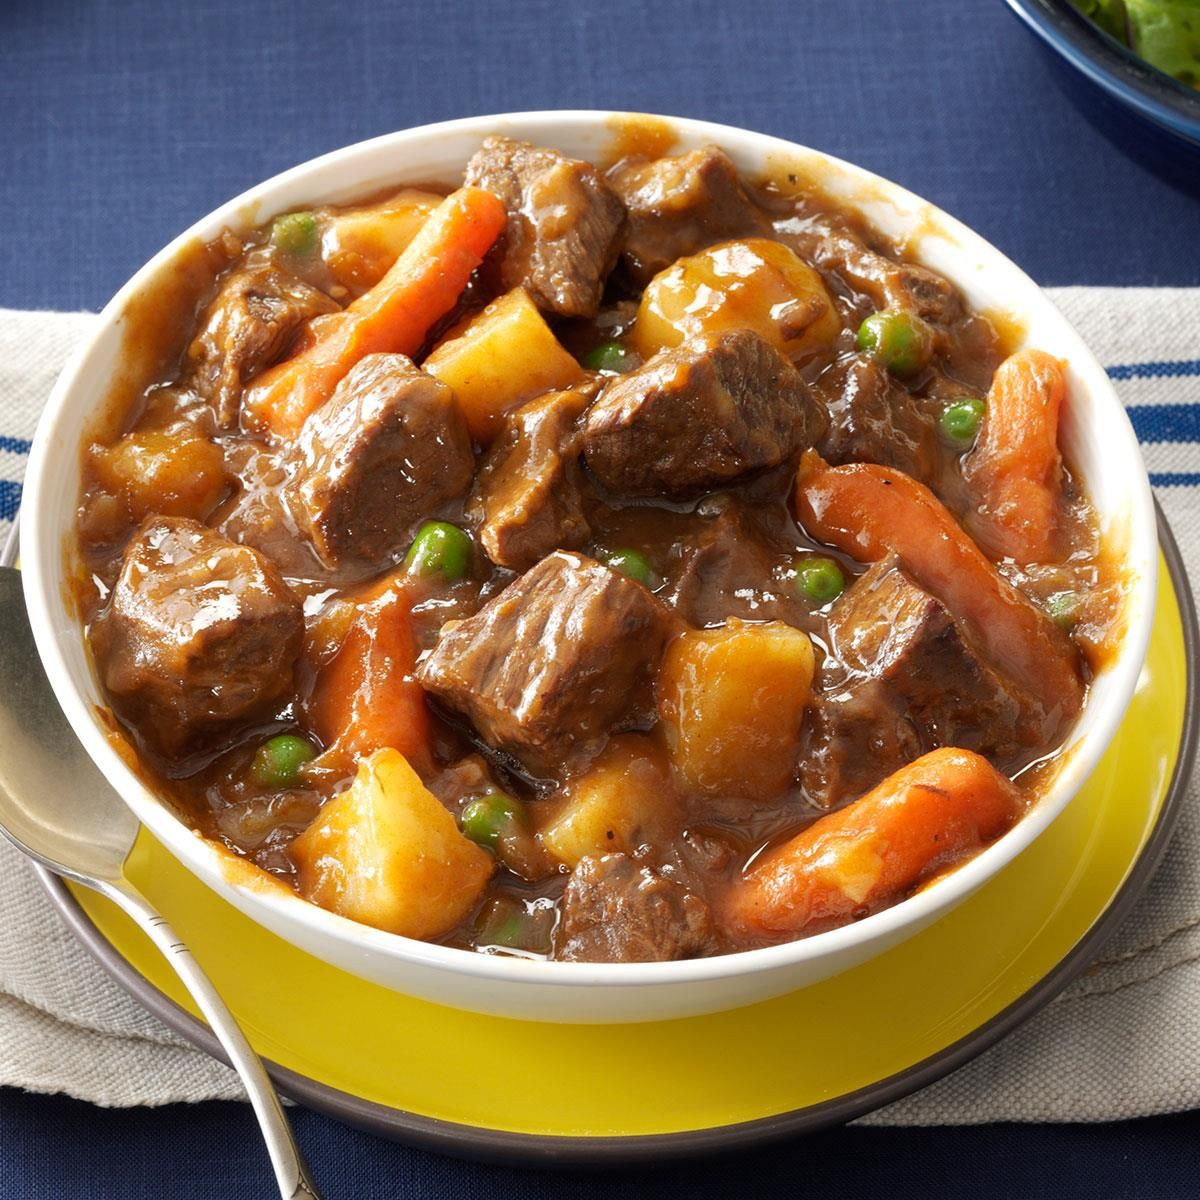 Vegetable Beef Stew Crockpot
 The 25 best Ve able stew slow cooker ideas on Pinterest